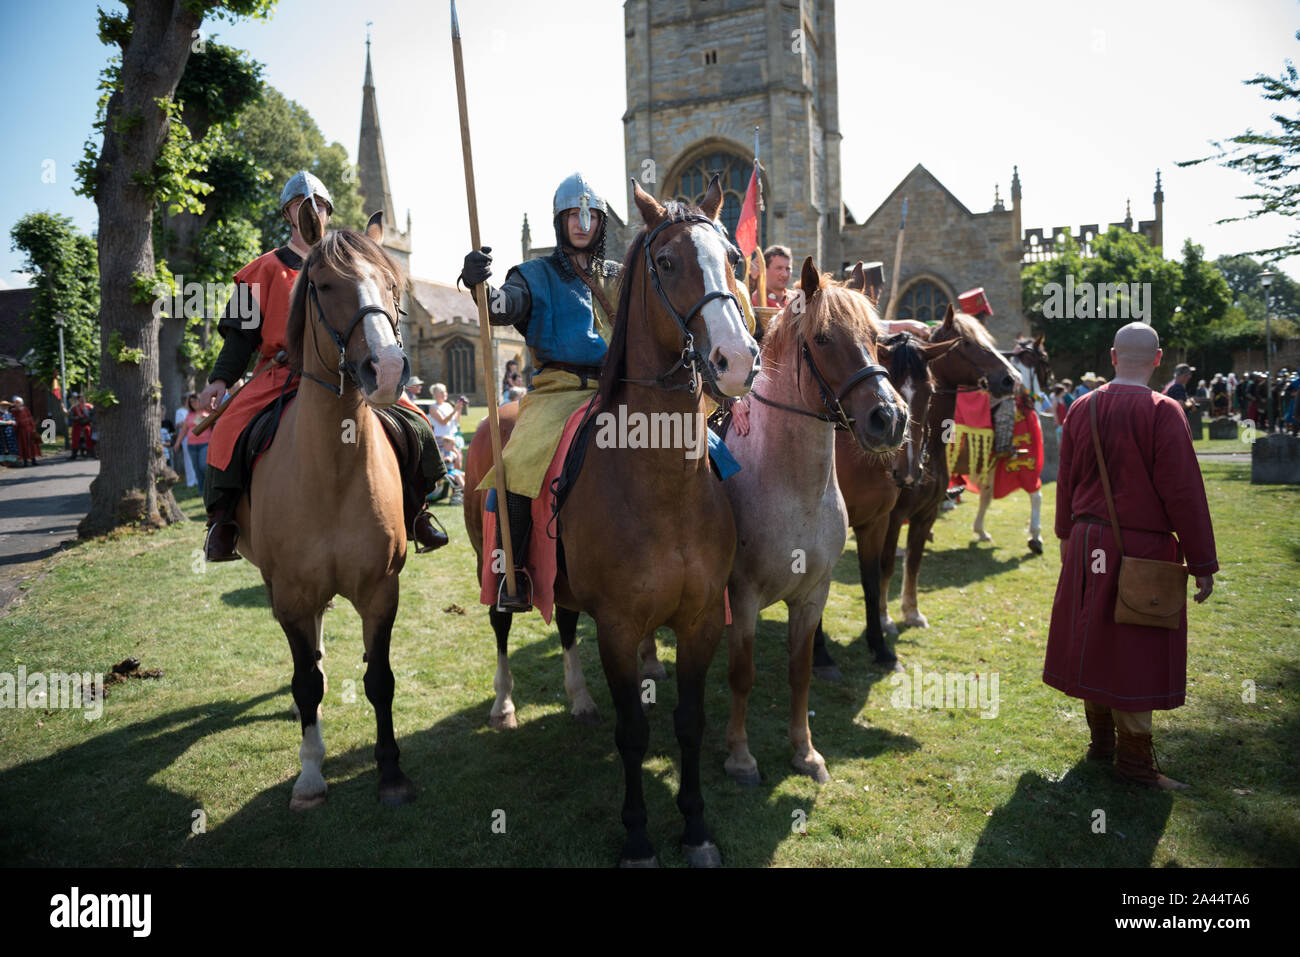 Evesham, Worcestershire, UK. 8th August, 2015. Pictured:  Reenactors await to begin the Grand Parade through the streets of Evesham. / Thousands of vi Stock Photo